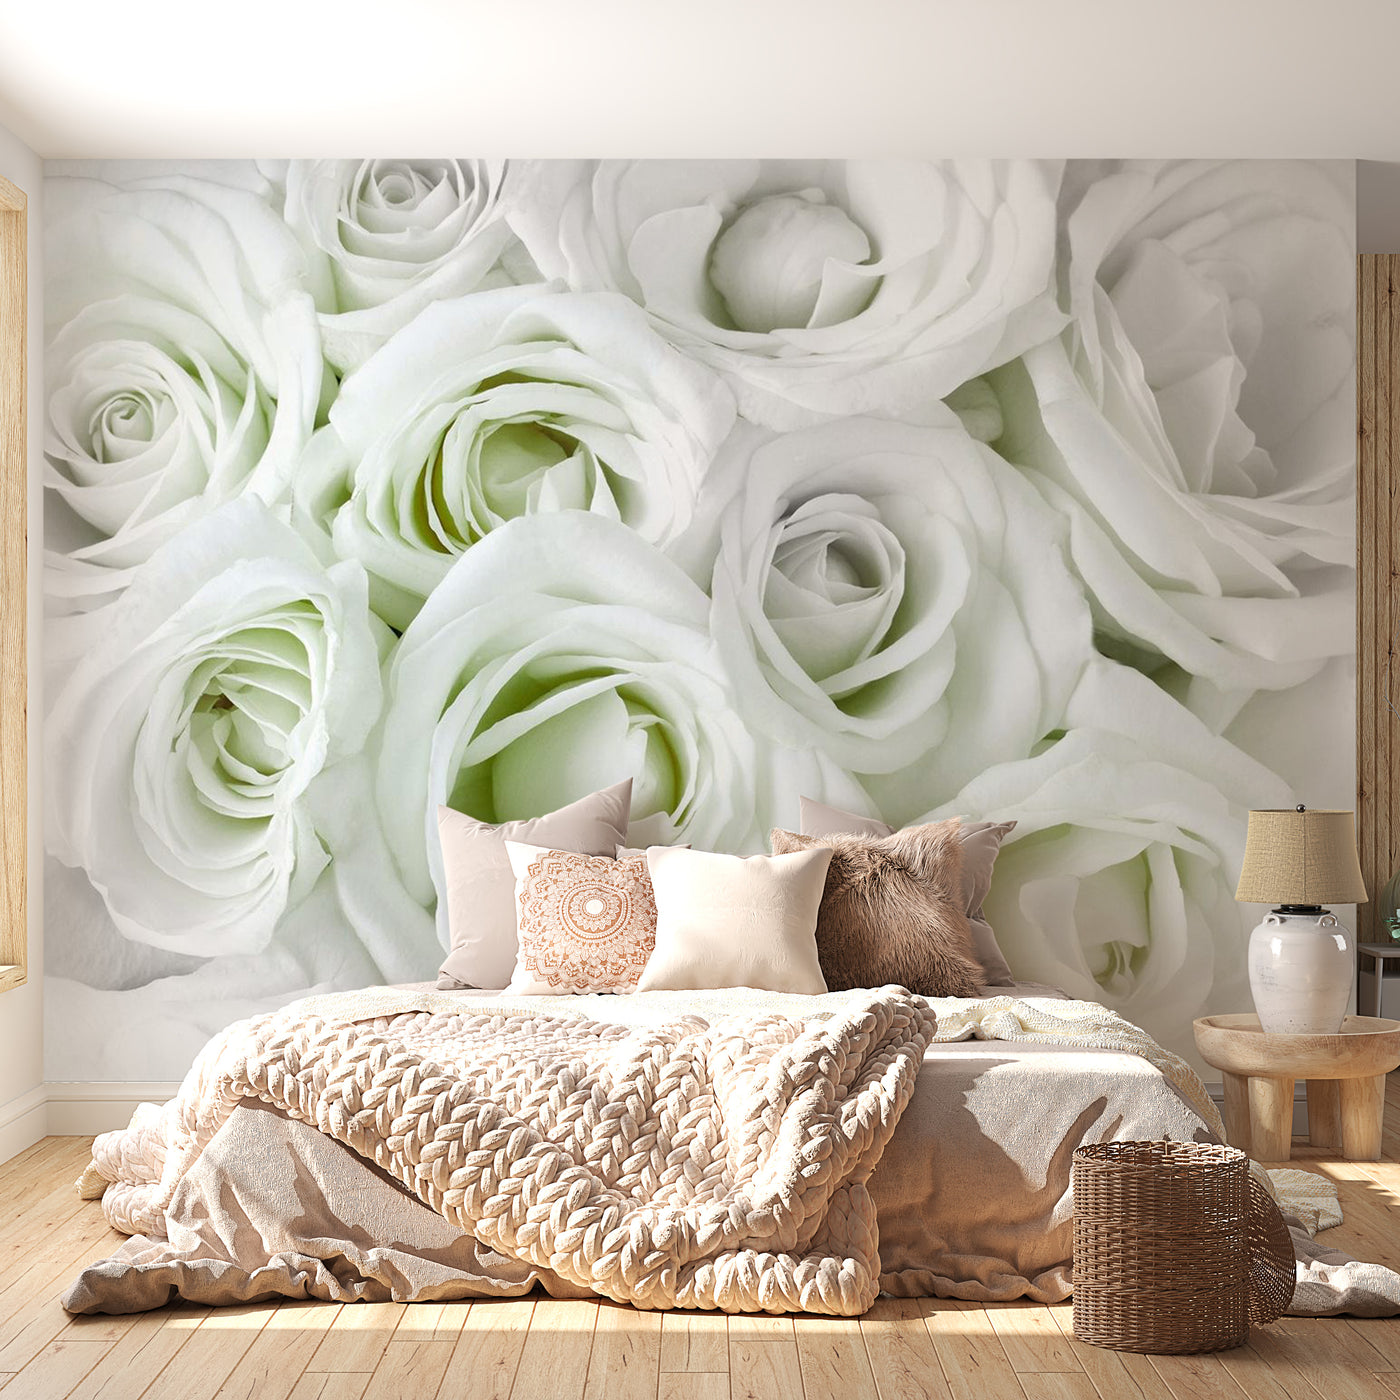 Peel & Stick Floral Wall Mural - Satin Rose Green - Removable Wall Decals